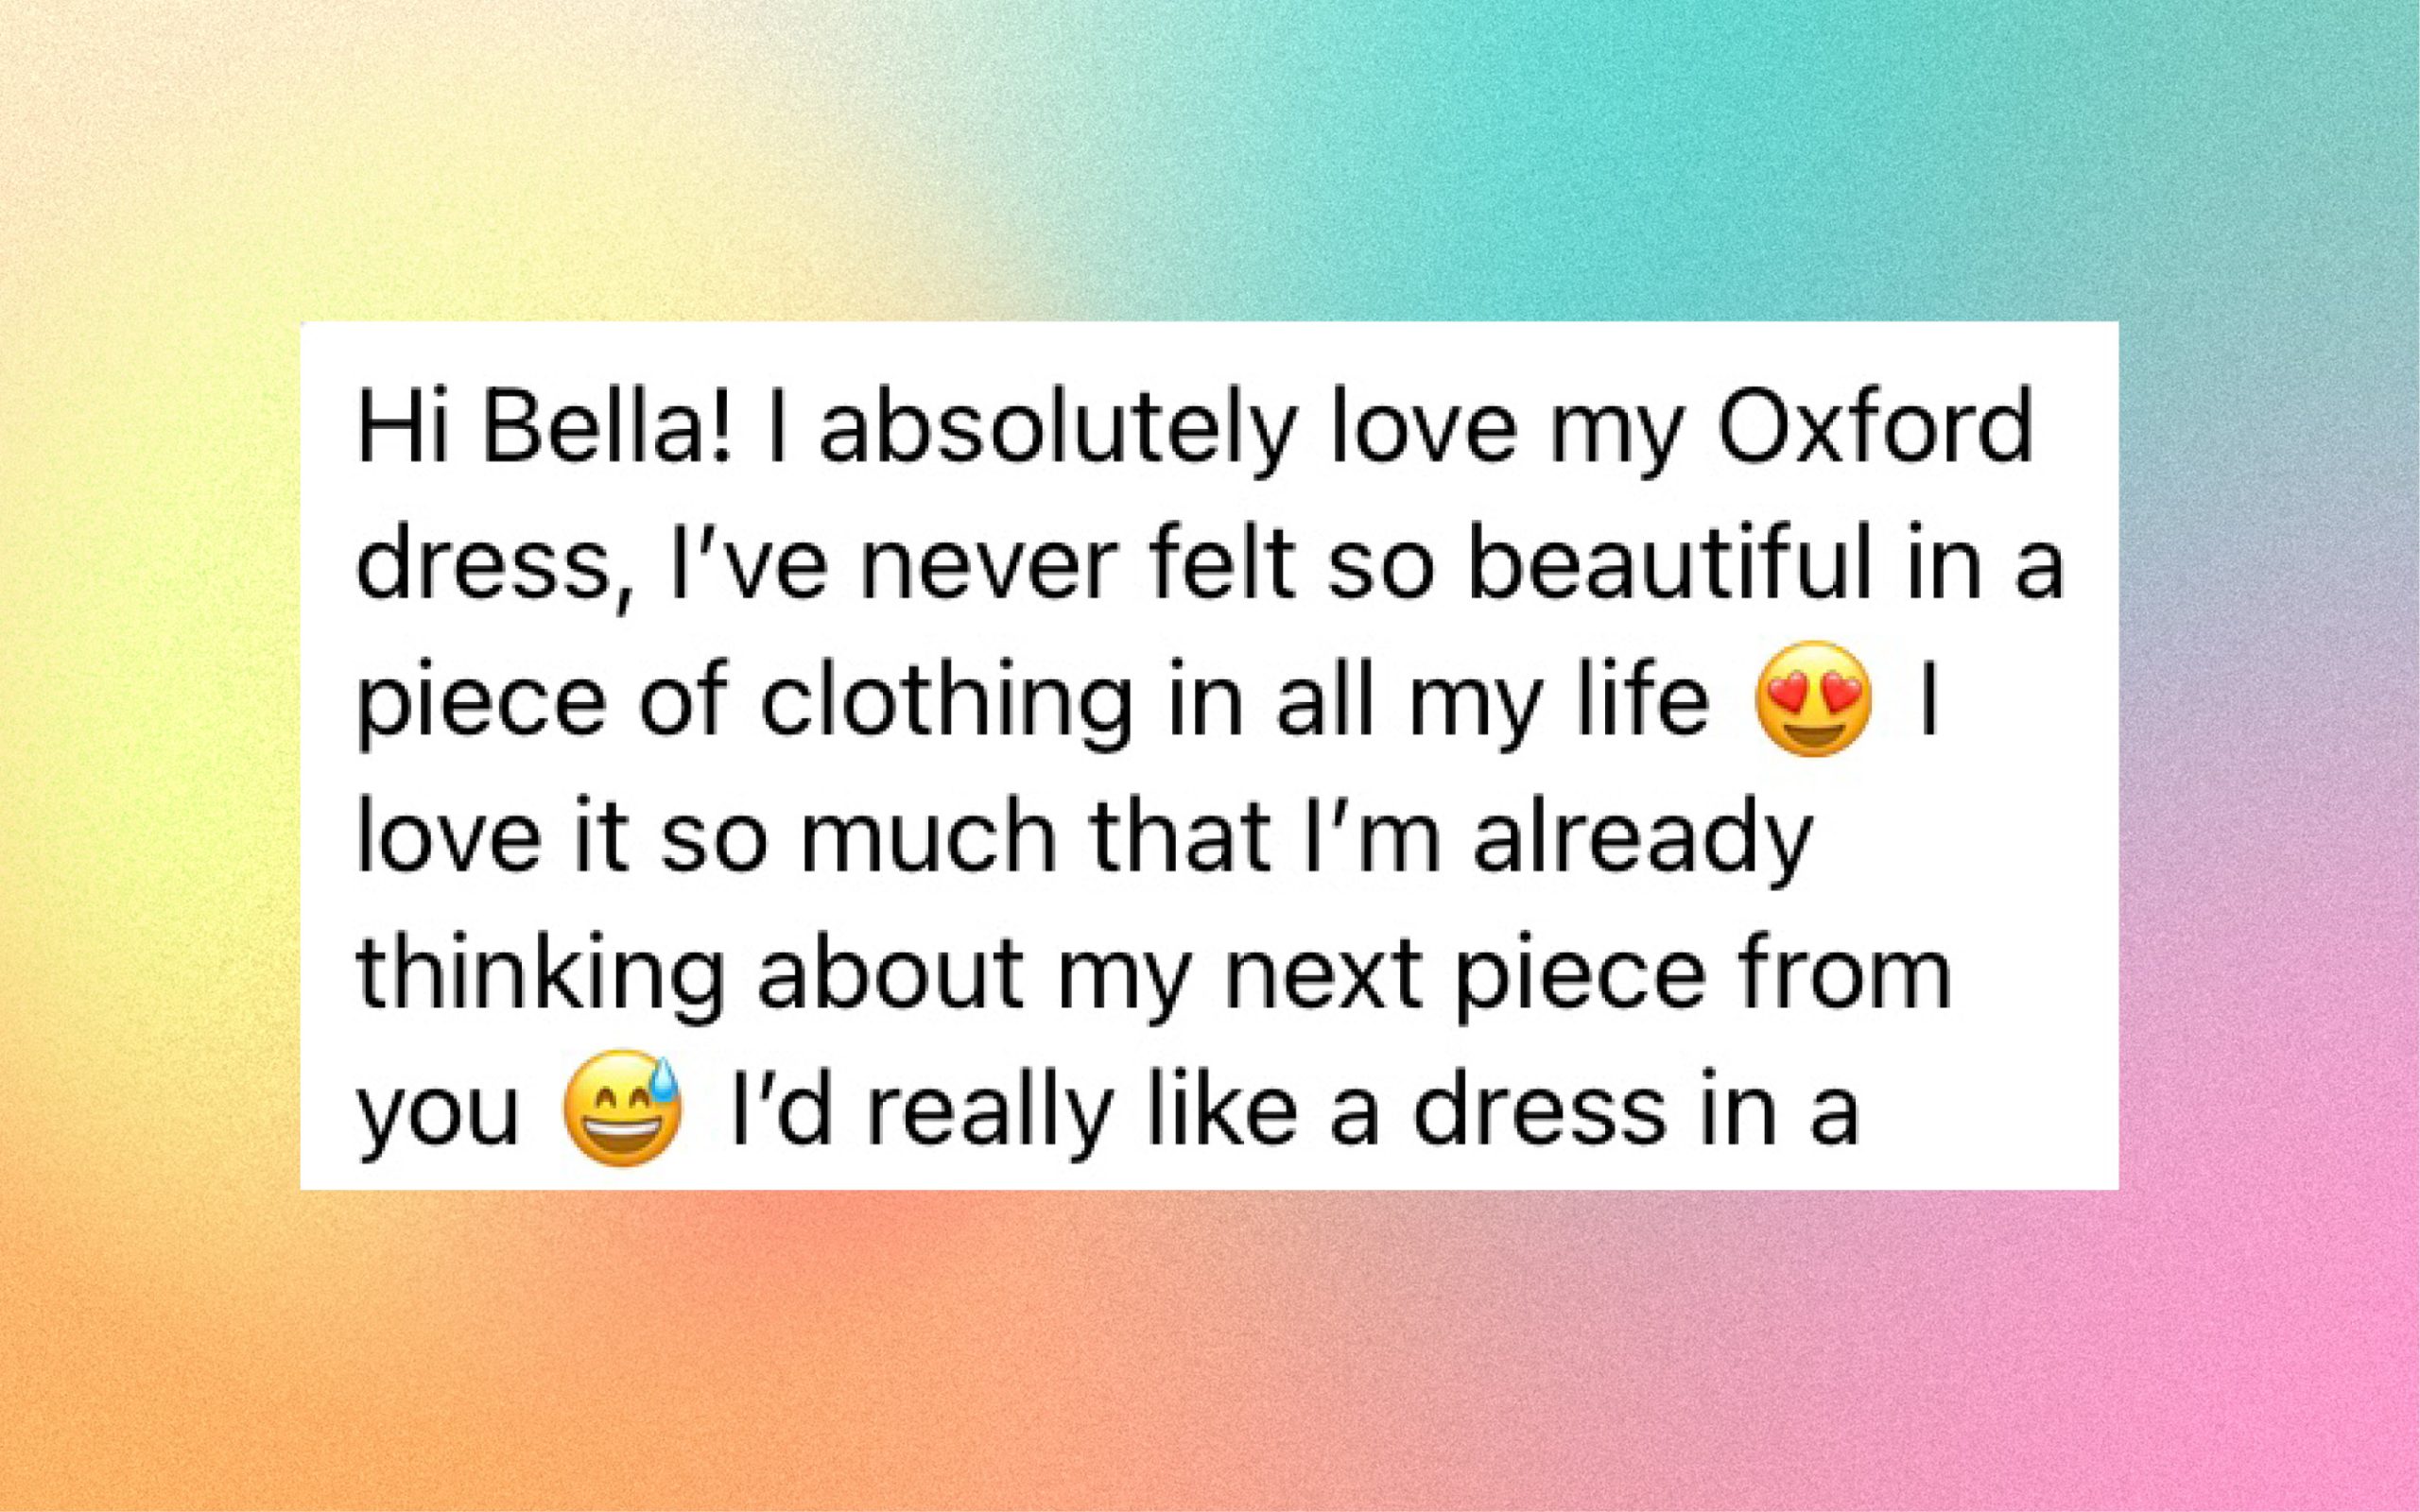 Bella!! I absolutely love my Oxford dress, I've never felt so beautiful in a piece of clothing in all my life. I love it so much that I'm already thinking about the next piece from you. 